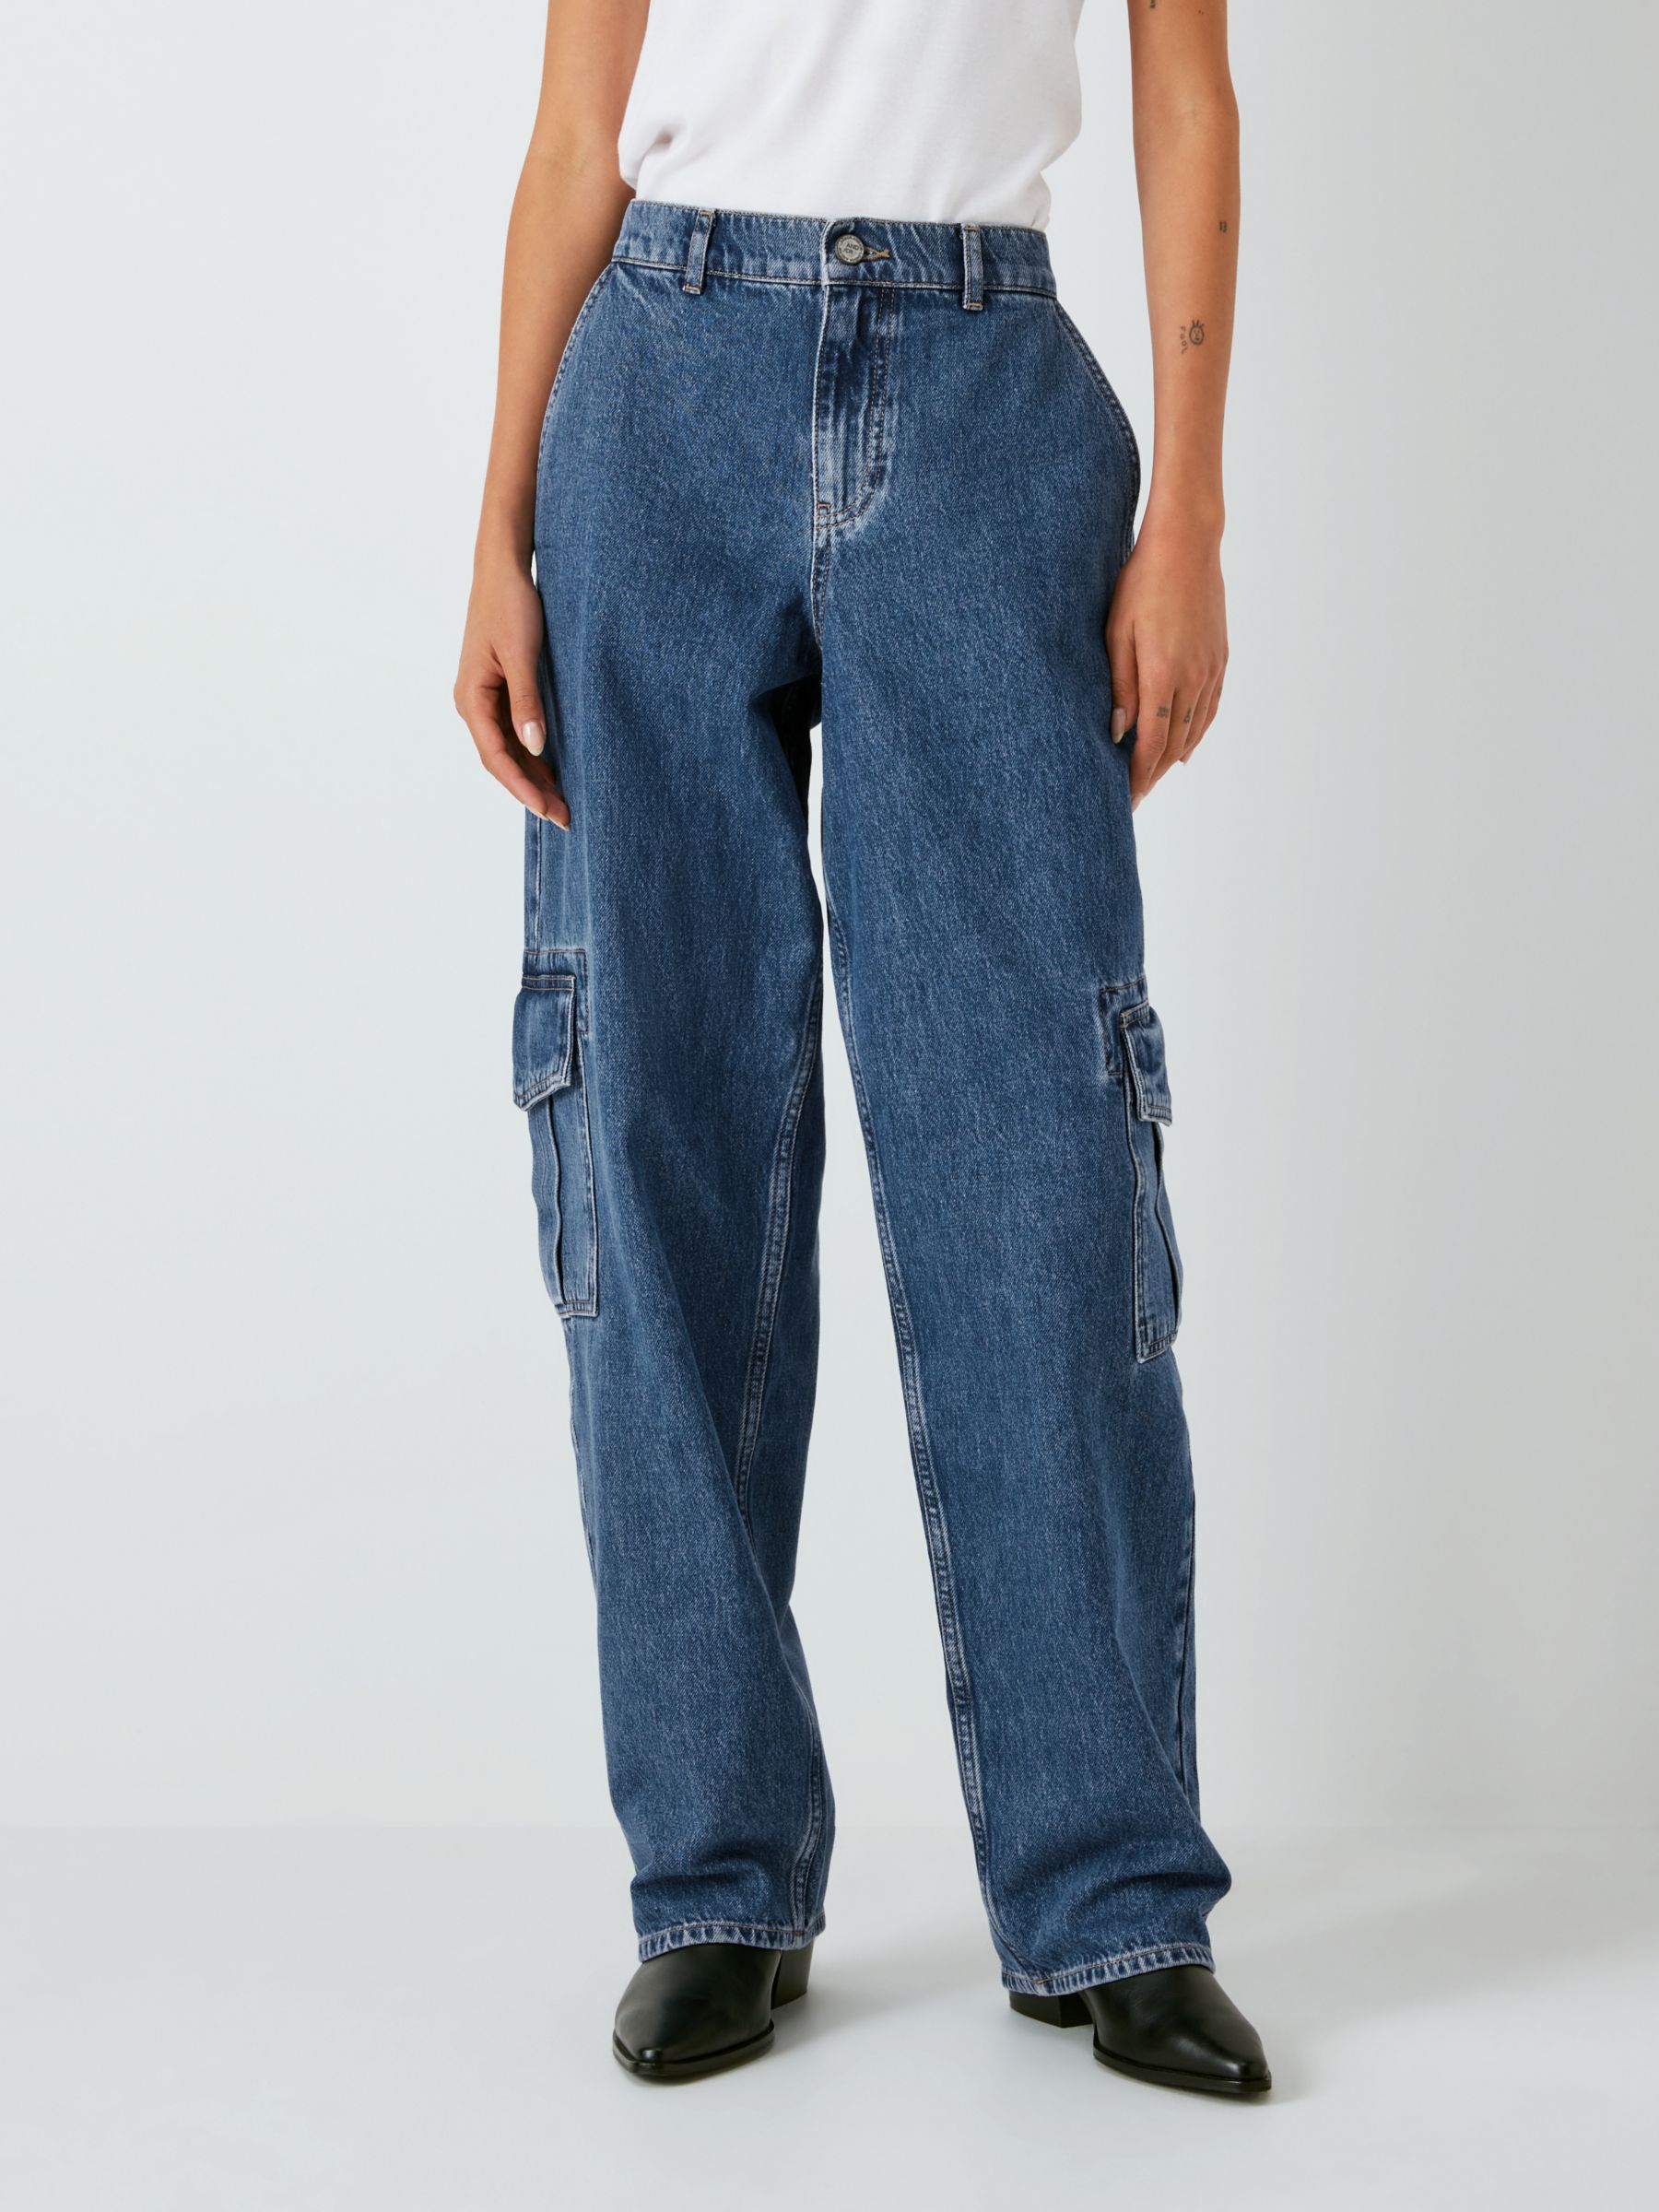 AND/OR Culver Cargo Jeans, Mid Blue Wash at John Lewis & Partners